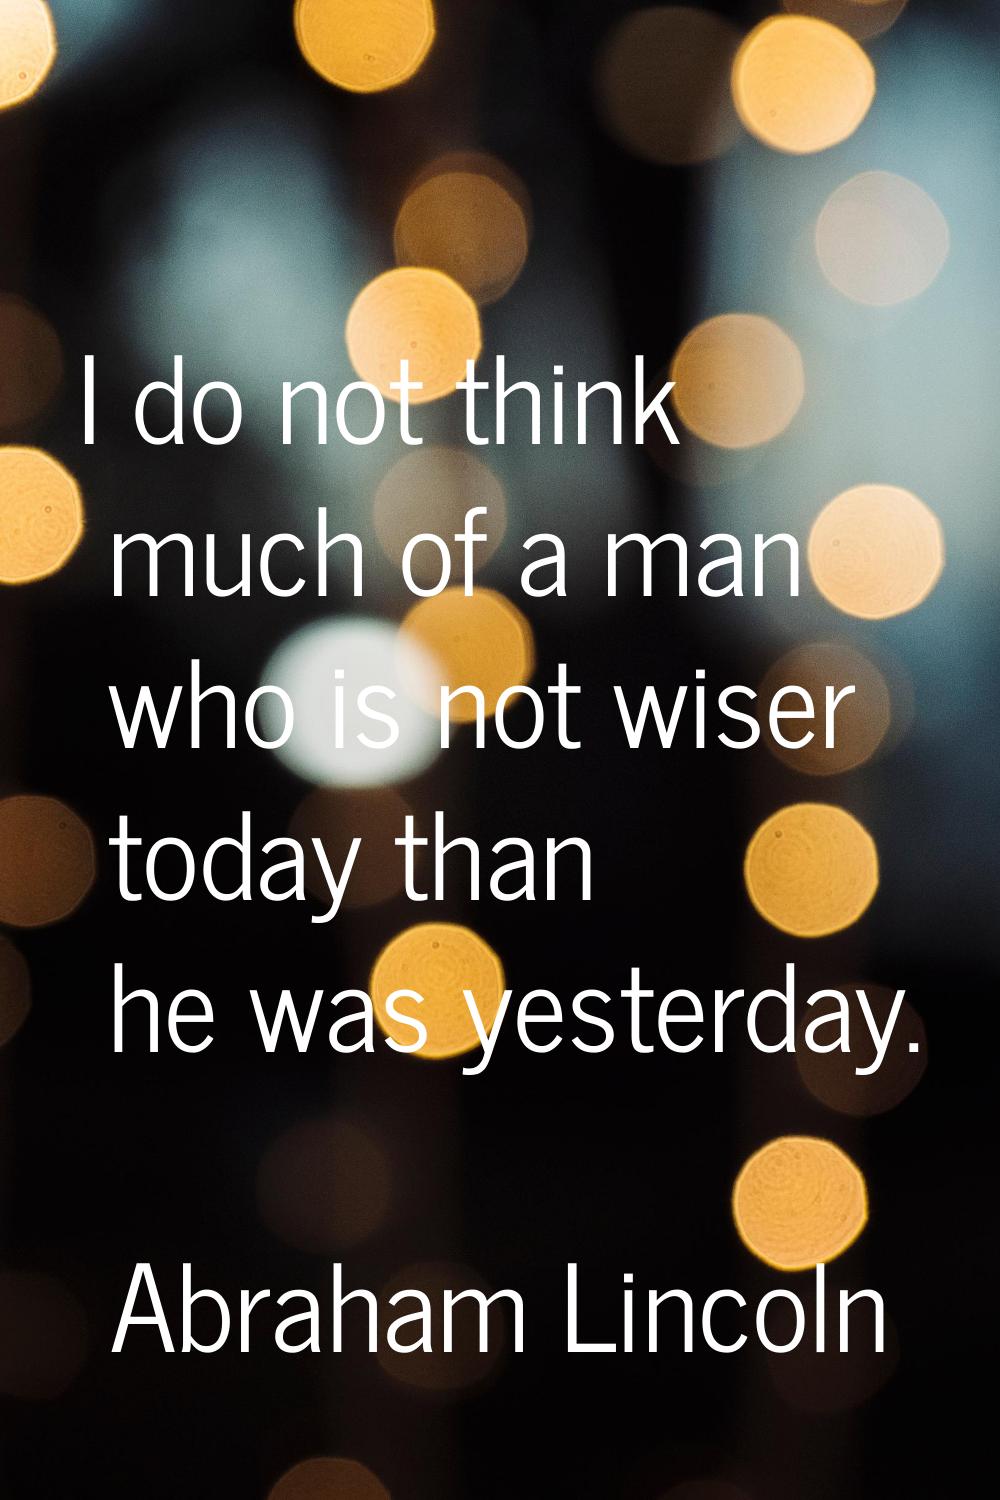 I do not think much of a man who is not wiser today than he was yesterday.